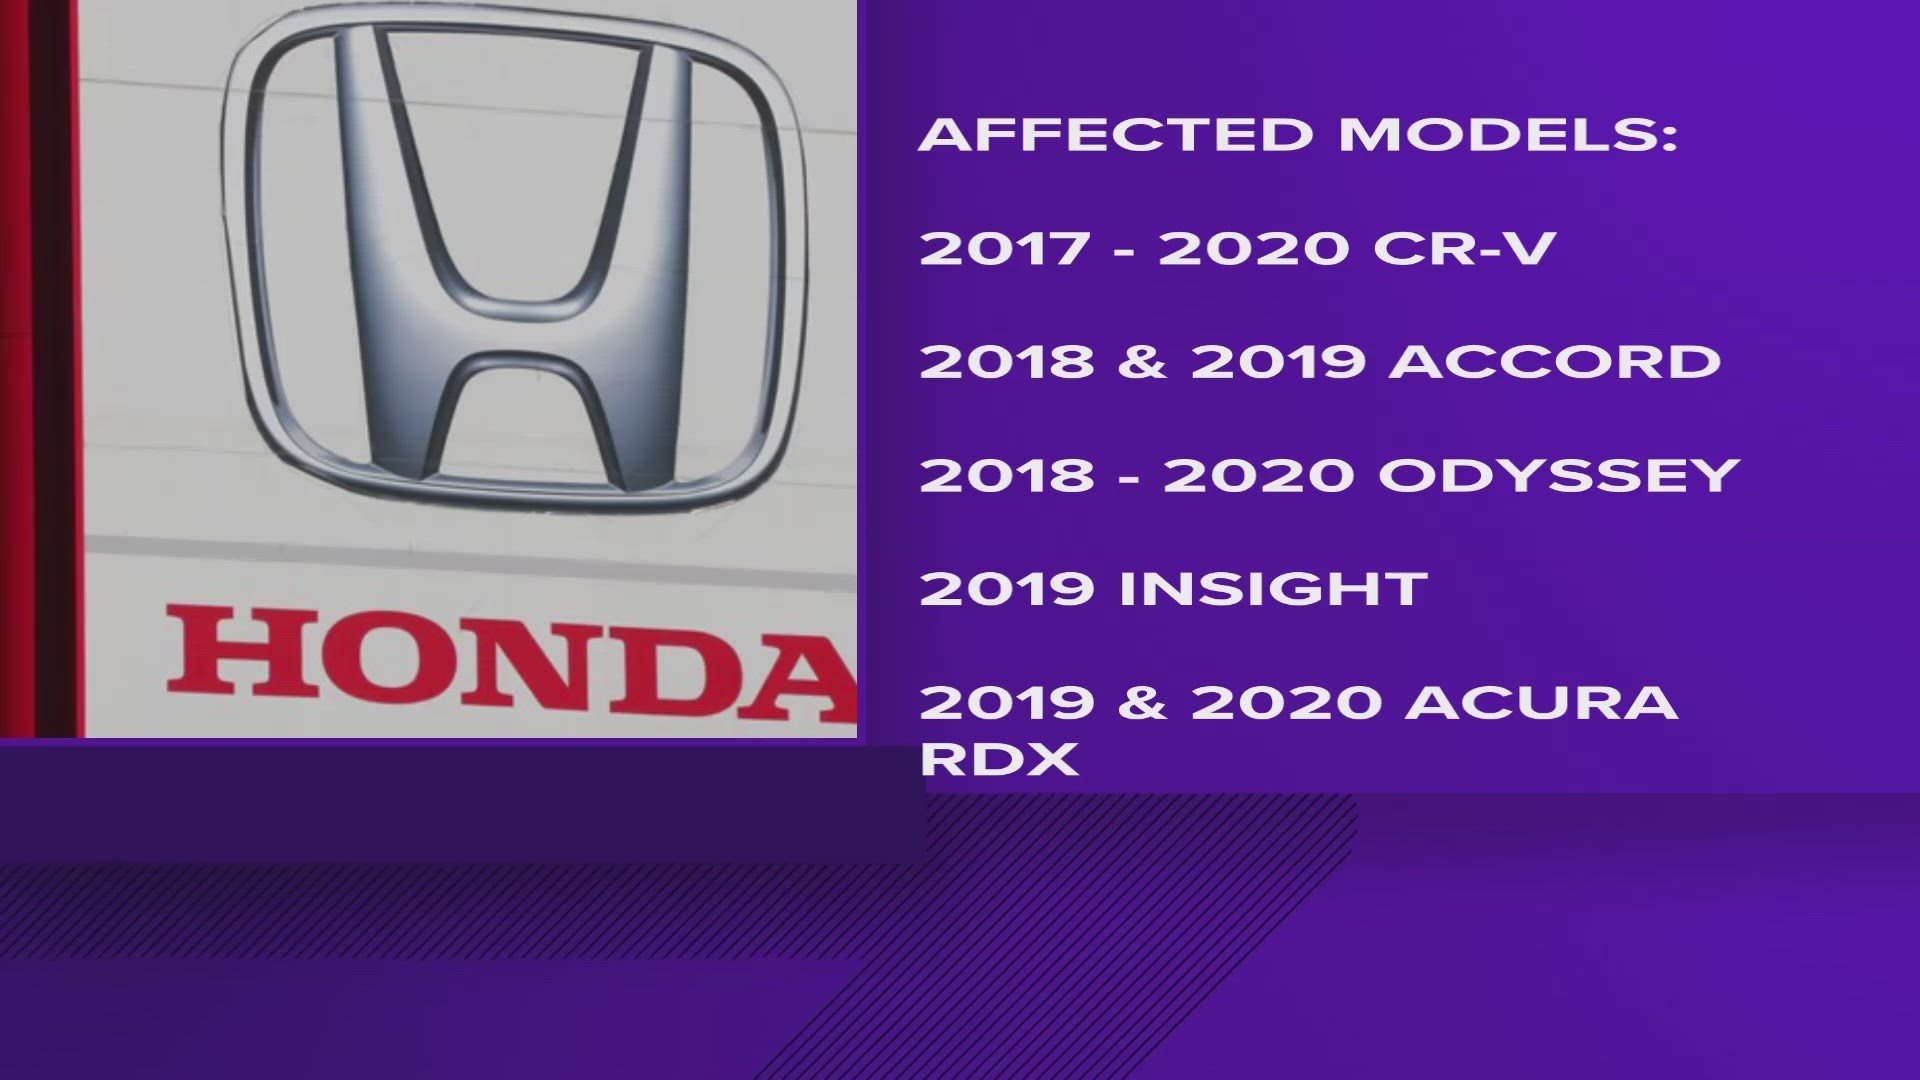 The Honda recall covers some of the automaker's top-selling models.